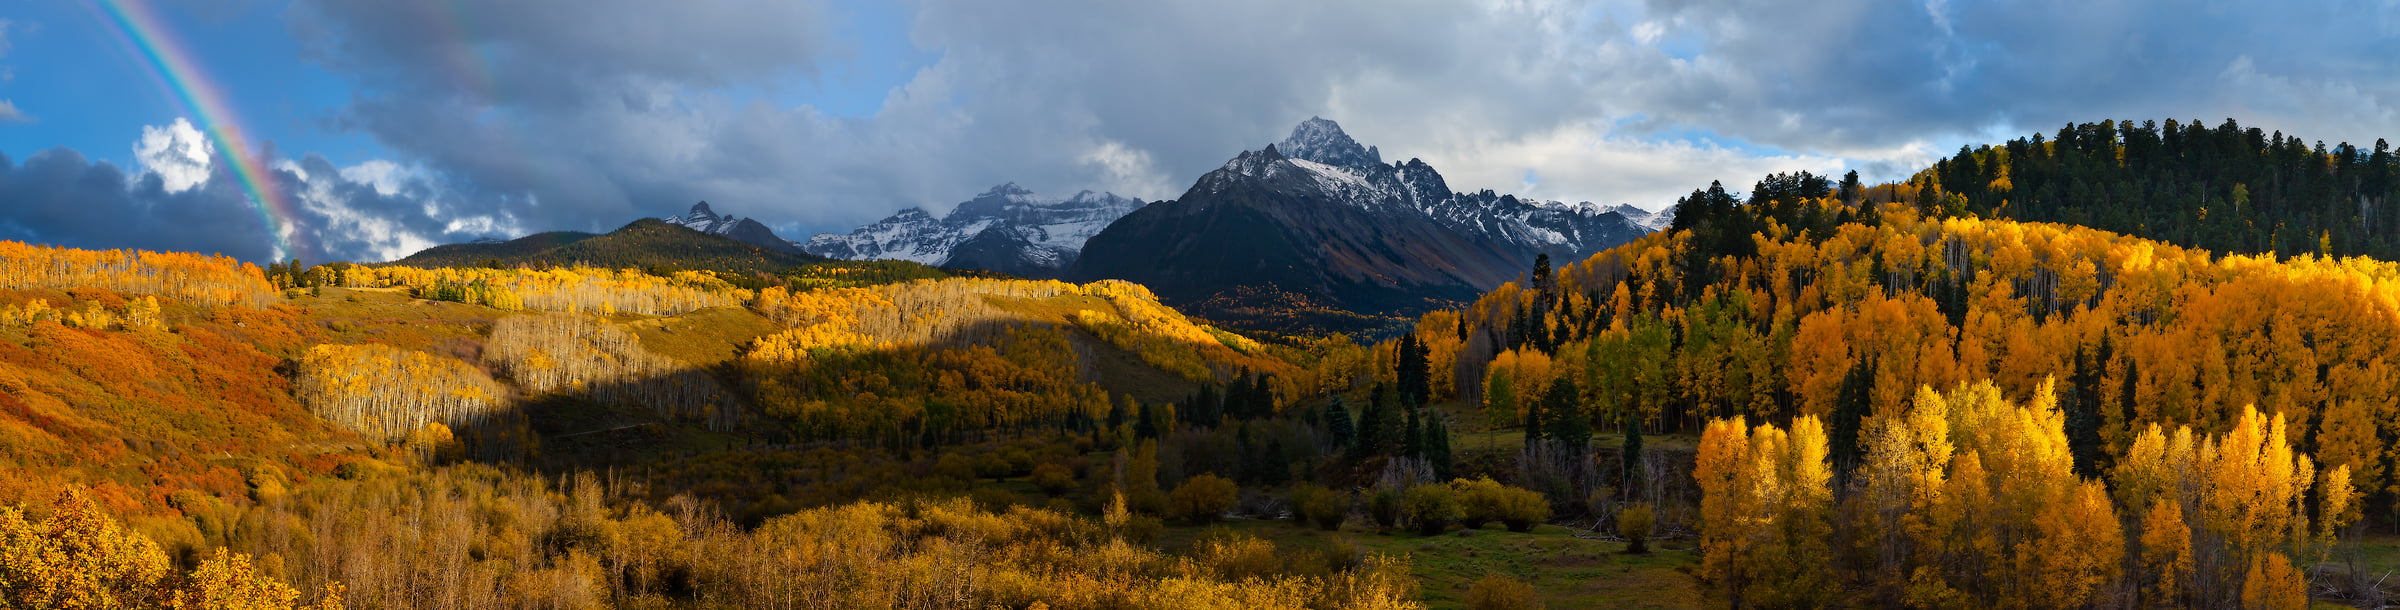 108 megapixels! A very high resolution, large-format VAST photo print of an autumn landscape with forests, mountains, and a rainbow; photograph created by Phillip Noll in Ridgway, Colorado